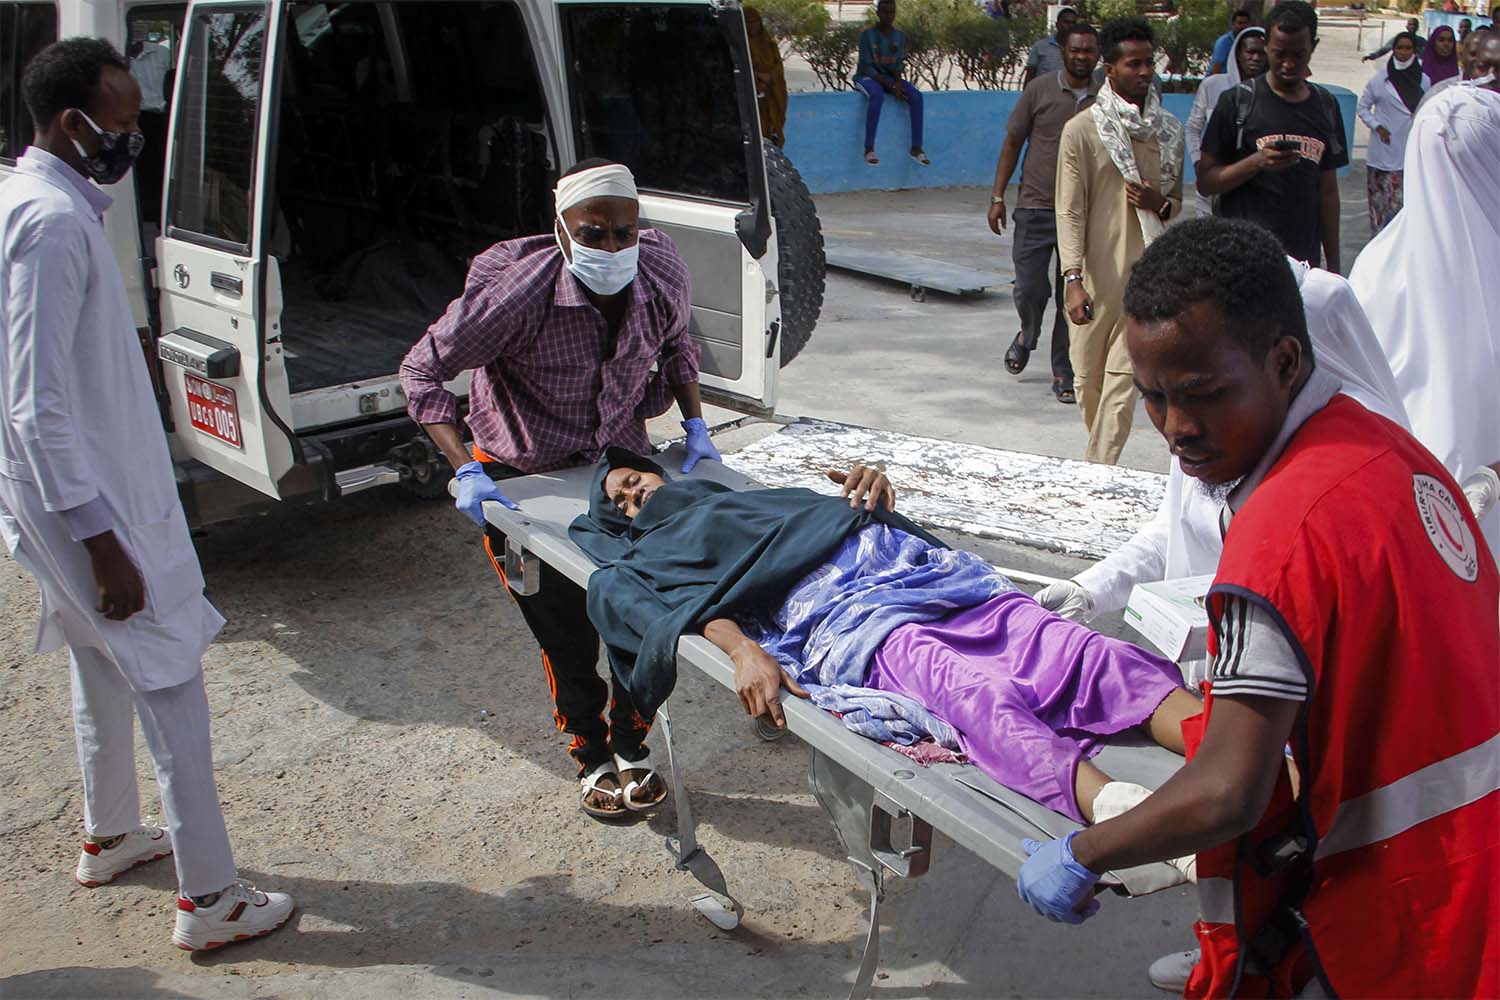 Somalia's security forces are often targeted in the suicide bomb attacks